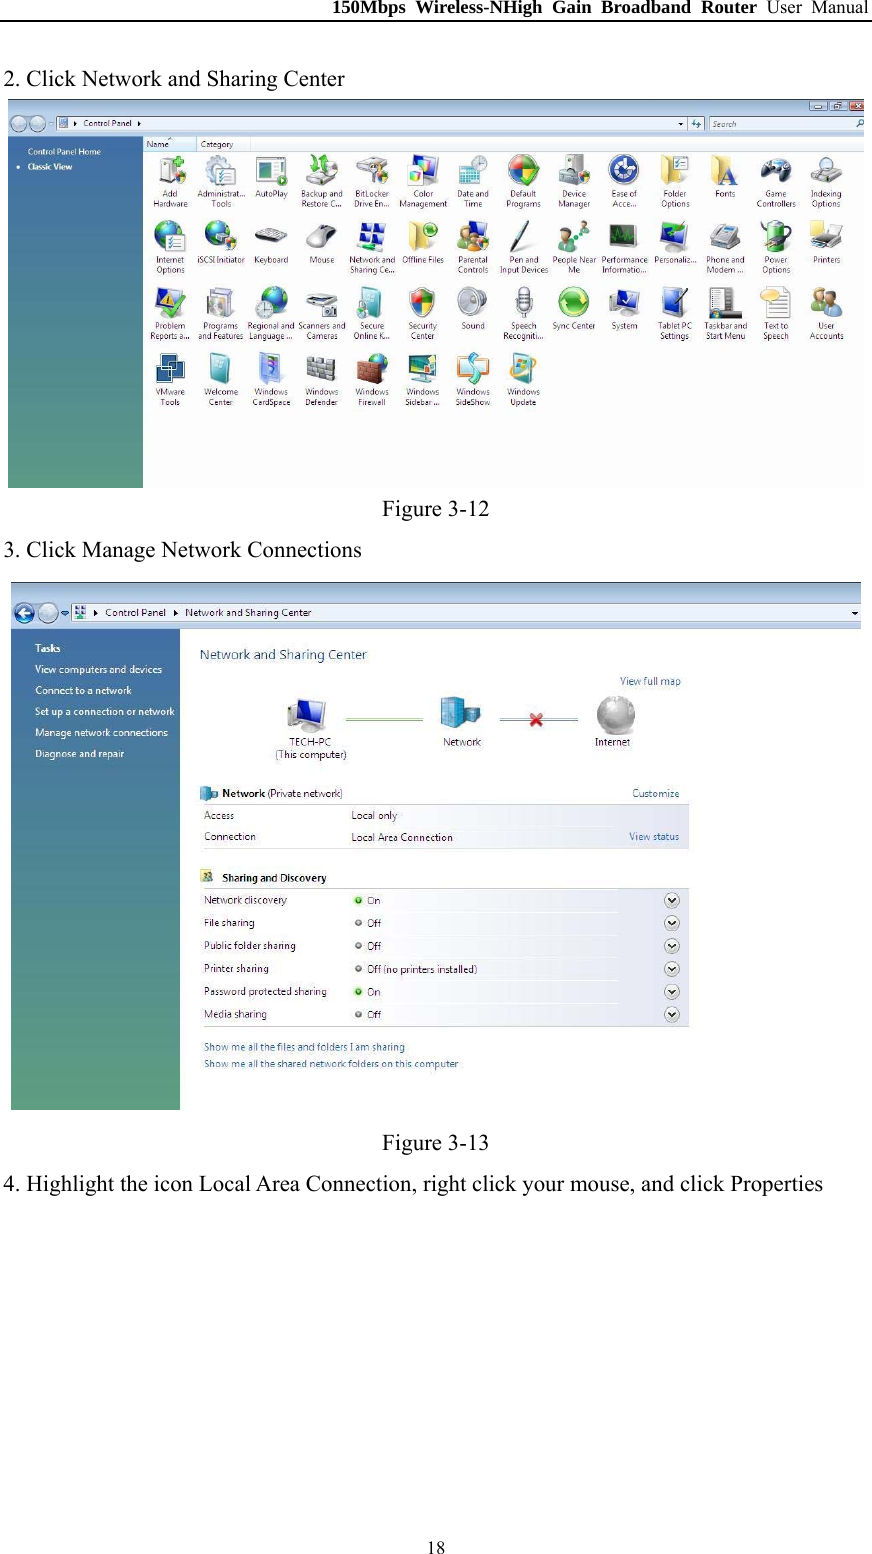 150Mbps Wireless-NHigh Gain Broadband Router User Manual 2. Click Network and Sharing Center  Figure 3-12 3. Click Manage Network Connections  Figure 3-13 4. Highlight the icon Local Area Connection, right click your mouse, and click Properties  18